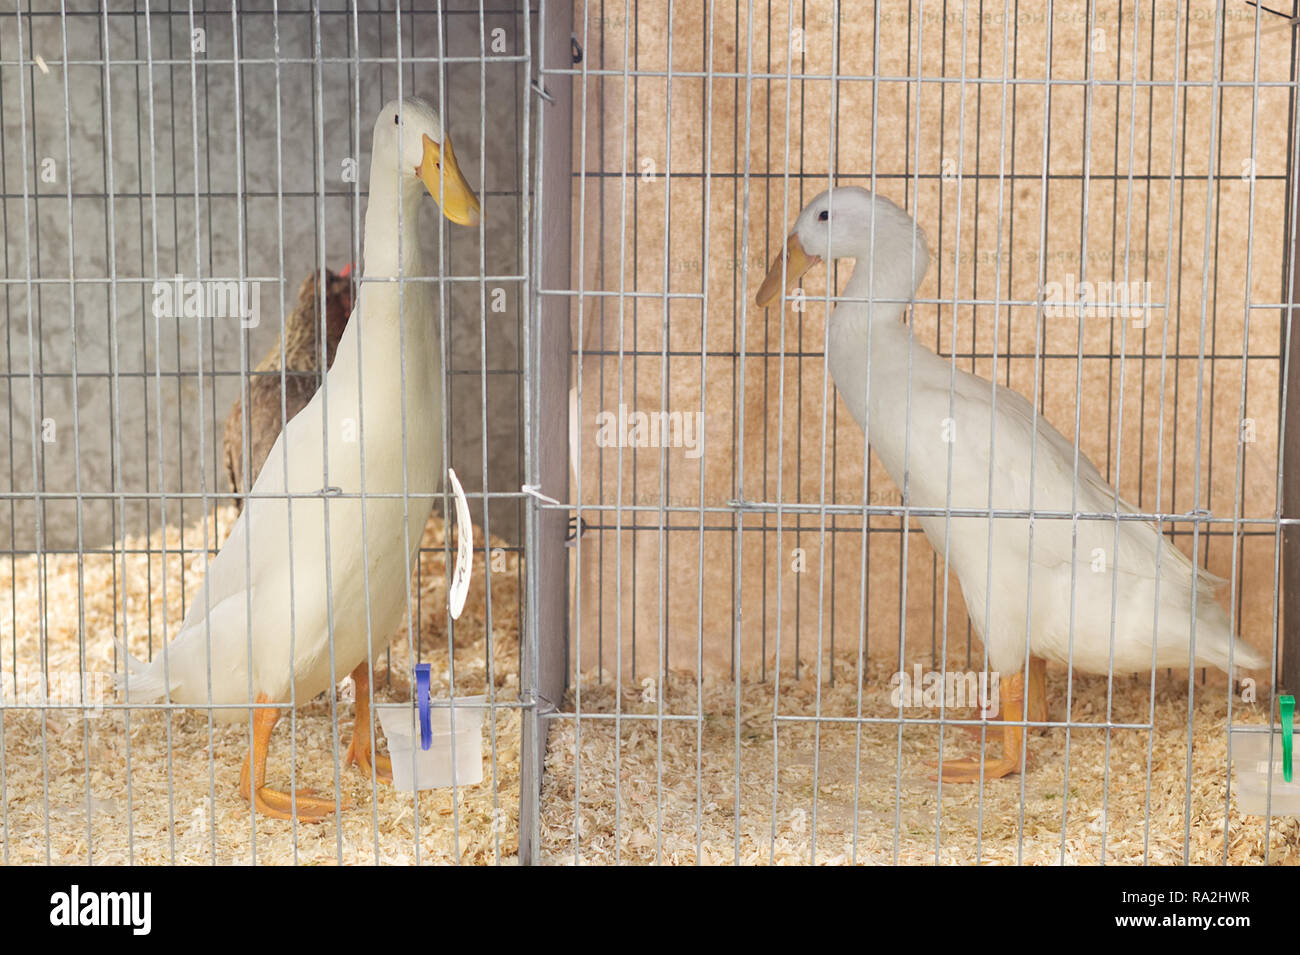 Indian Runner ducks in a cage Stock Photo